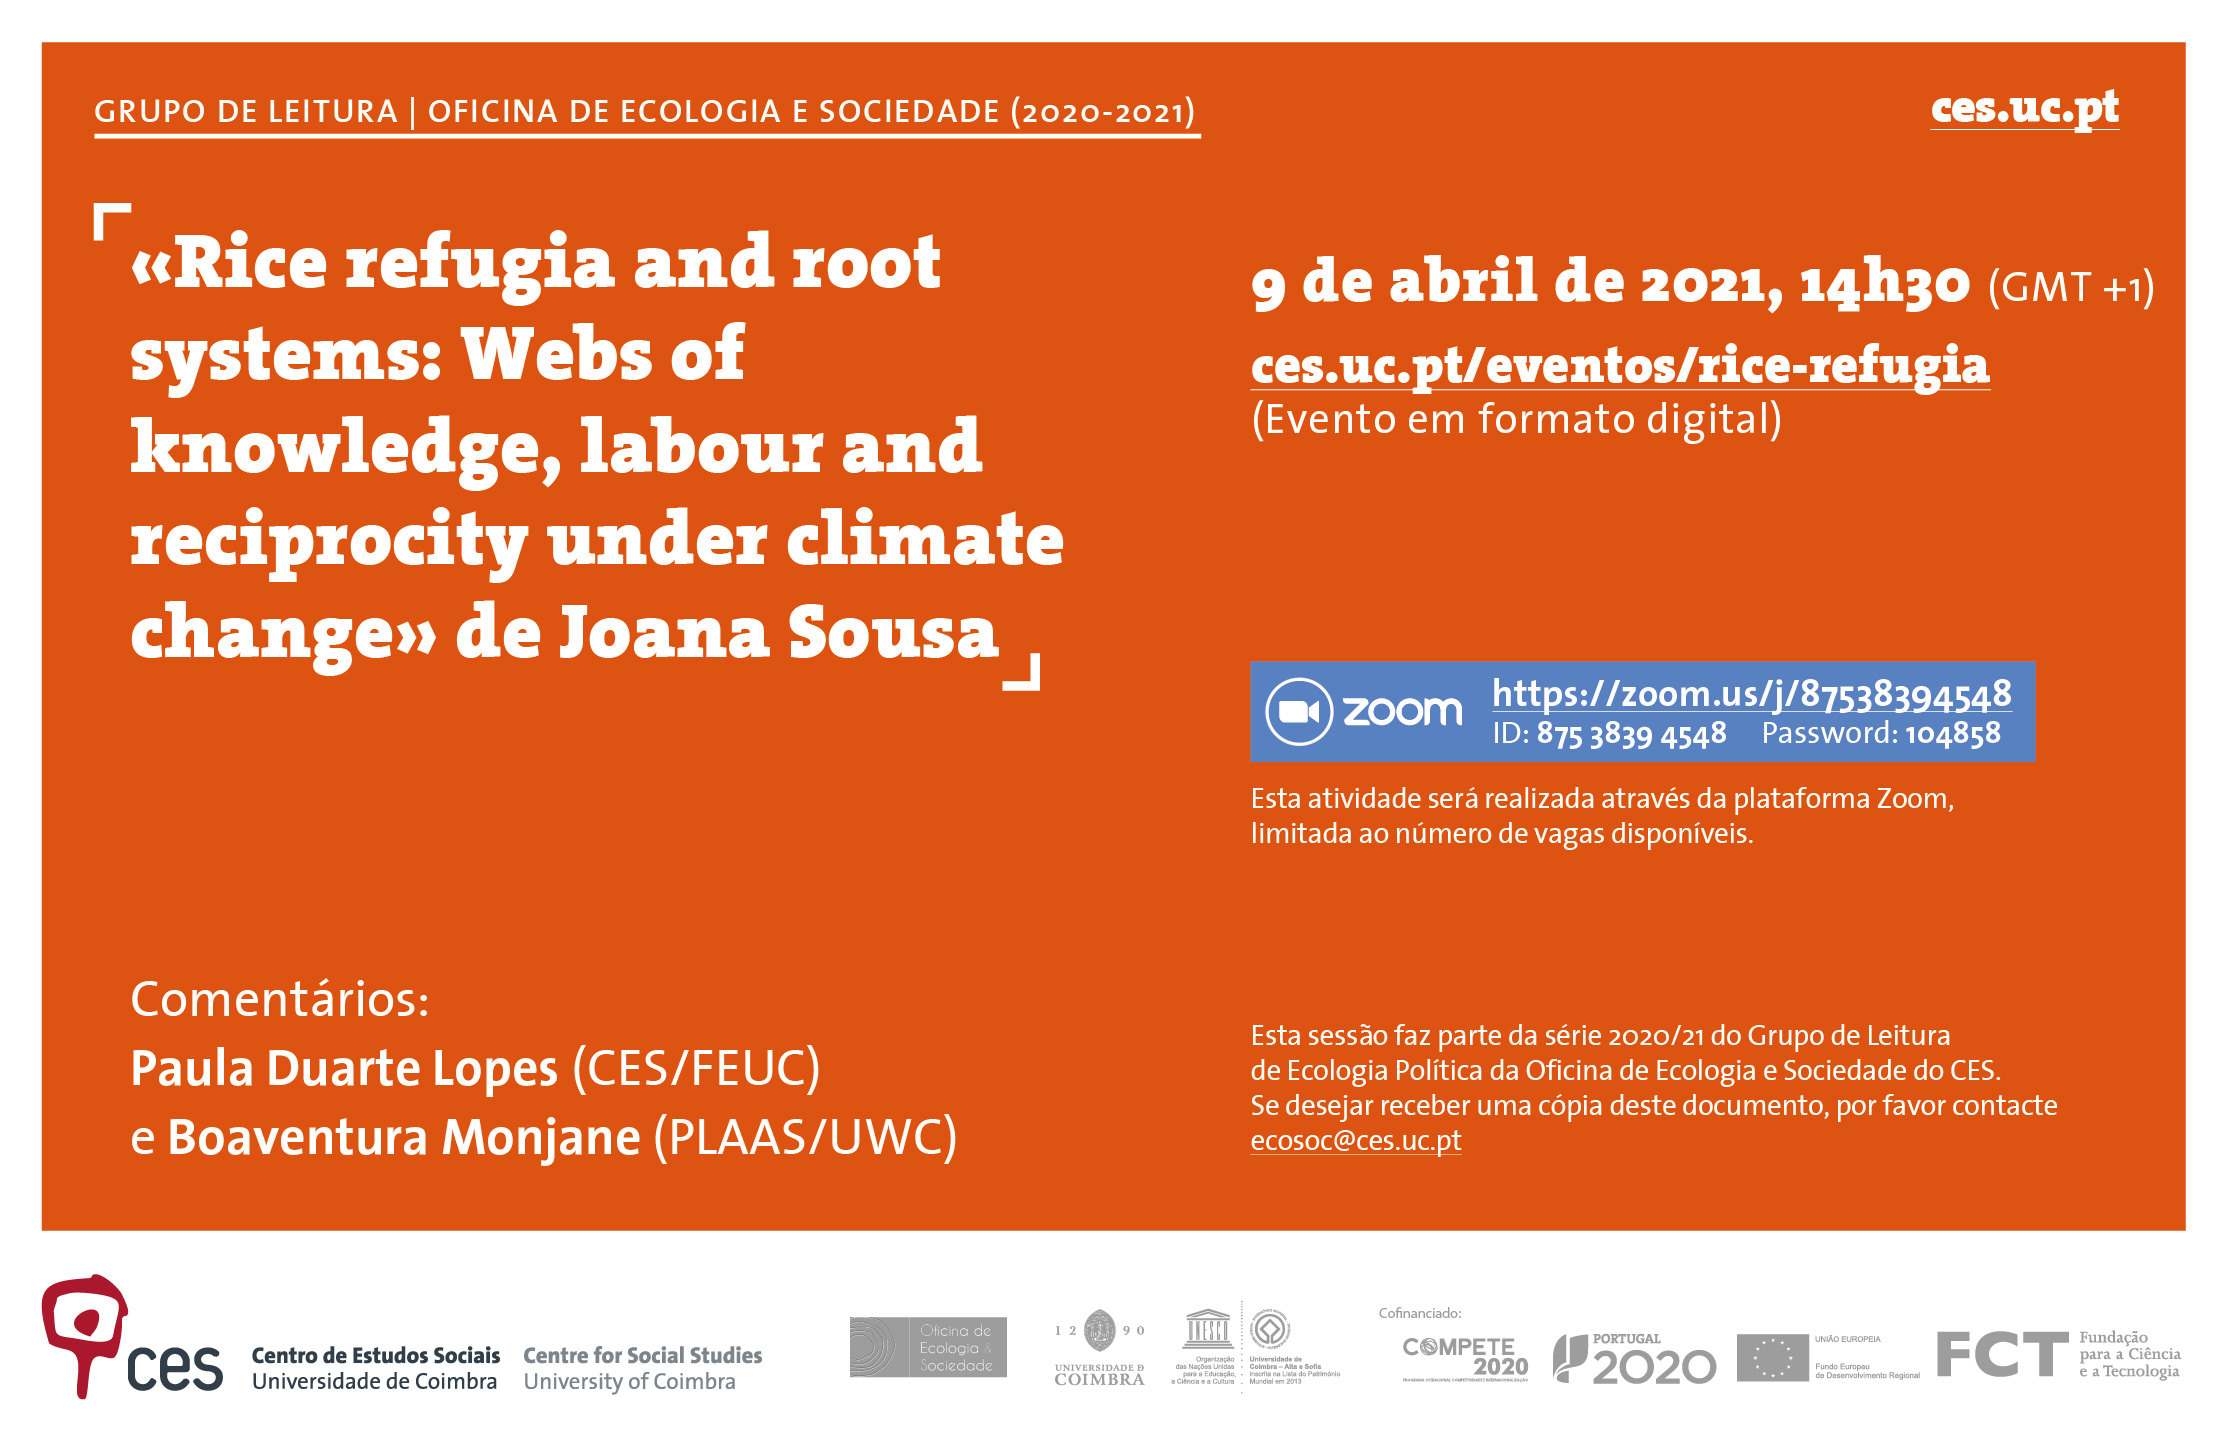 «Rice refugia and root systems: Webs of knowledge, labour and reciprocity under climate change» de Joana Sousa<span id="edit_31779"><script>$(function() { $('#edit_31779').load( "/myces/user/editobj.php?tipo=evento&id=31779" ); });</script></span>